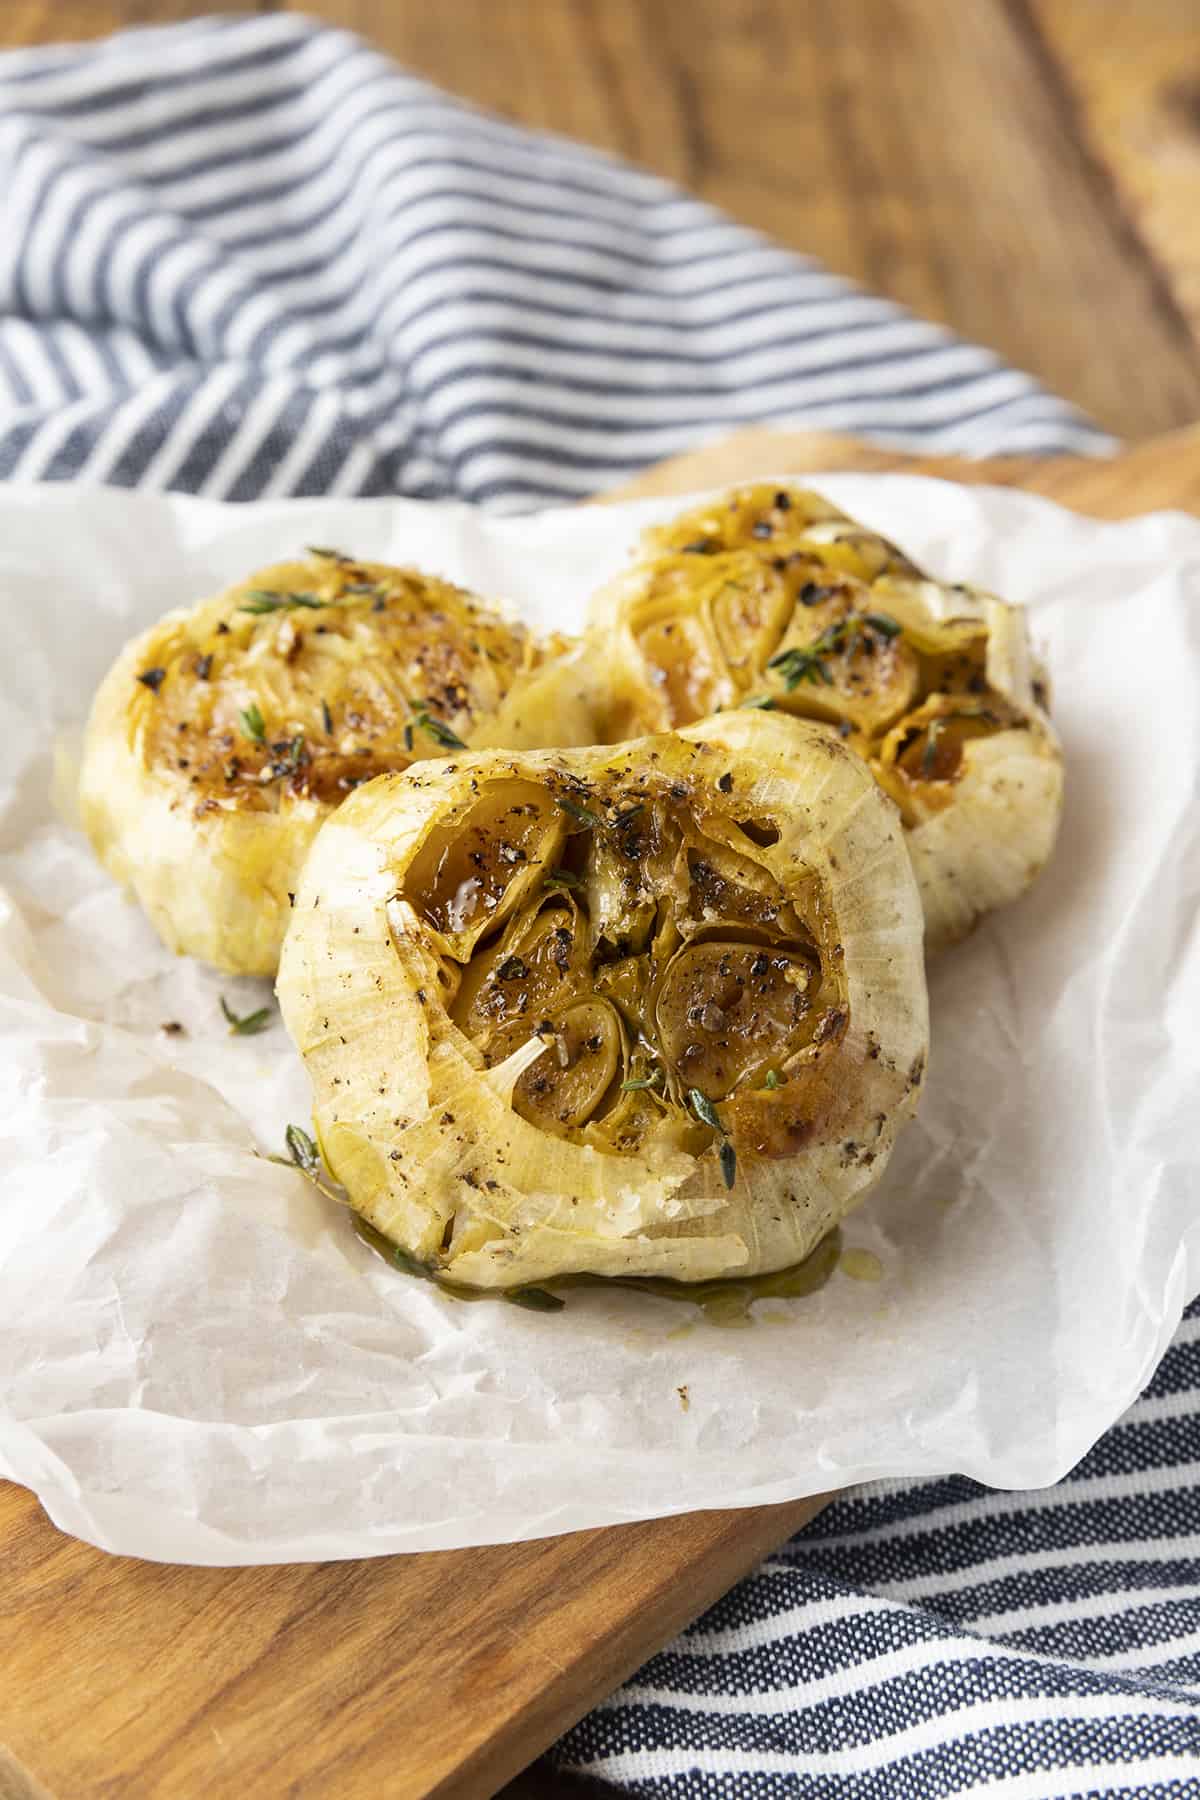 How to Roast Garlic in the Oven - Oven Roasted Garlic